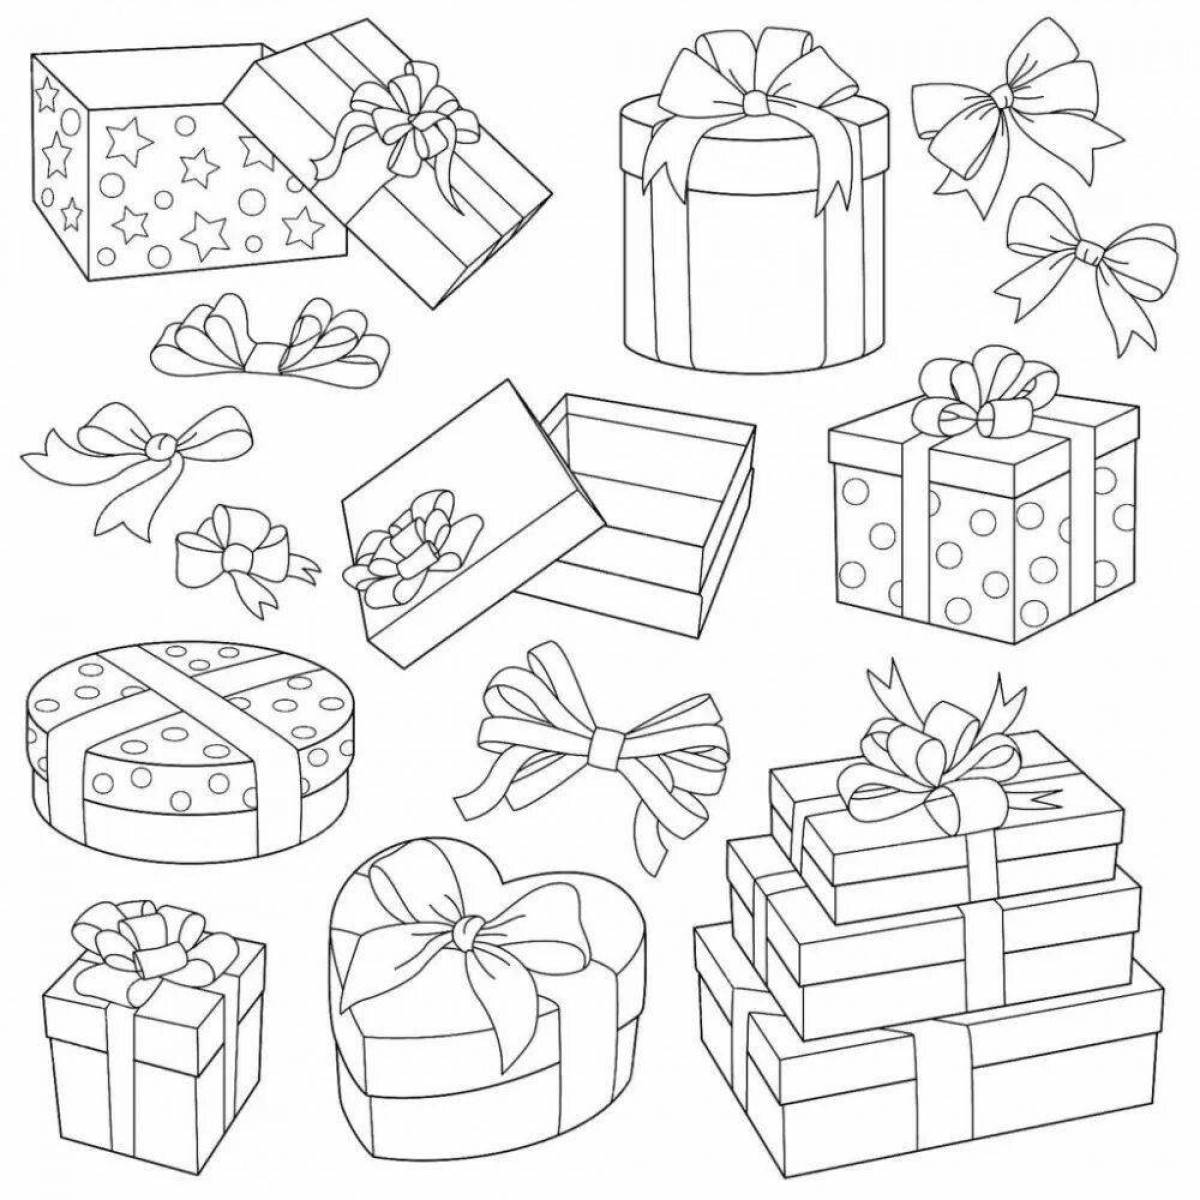 Coloring page wild birthday present